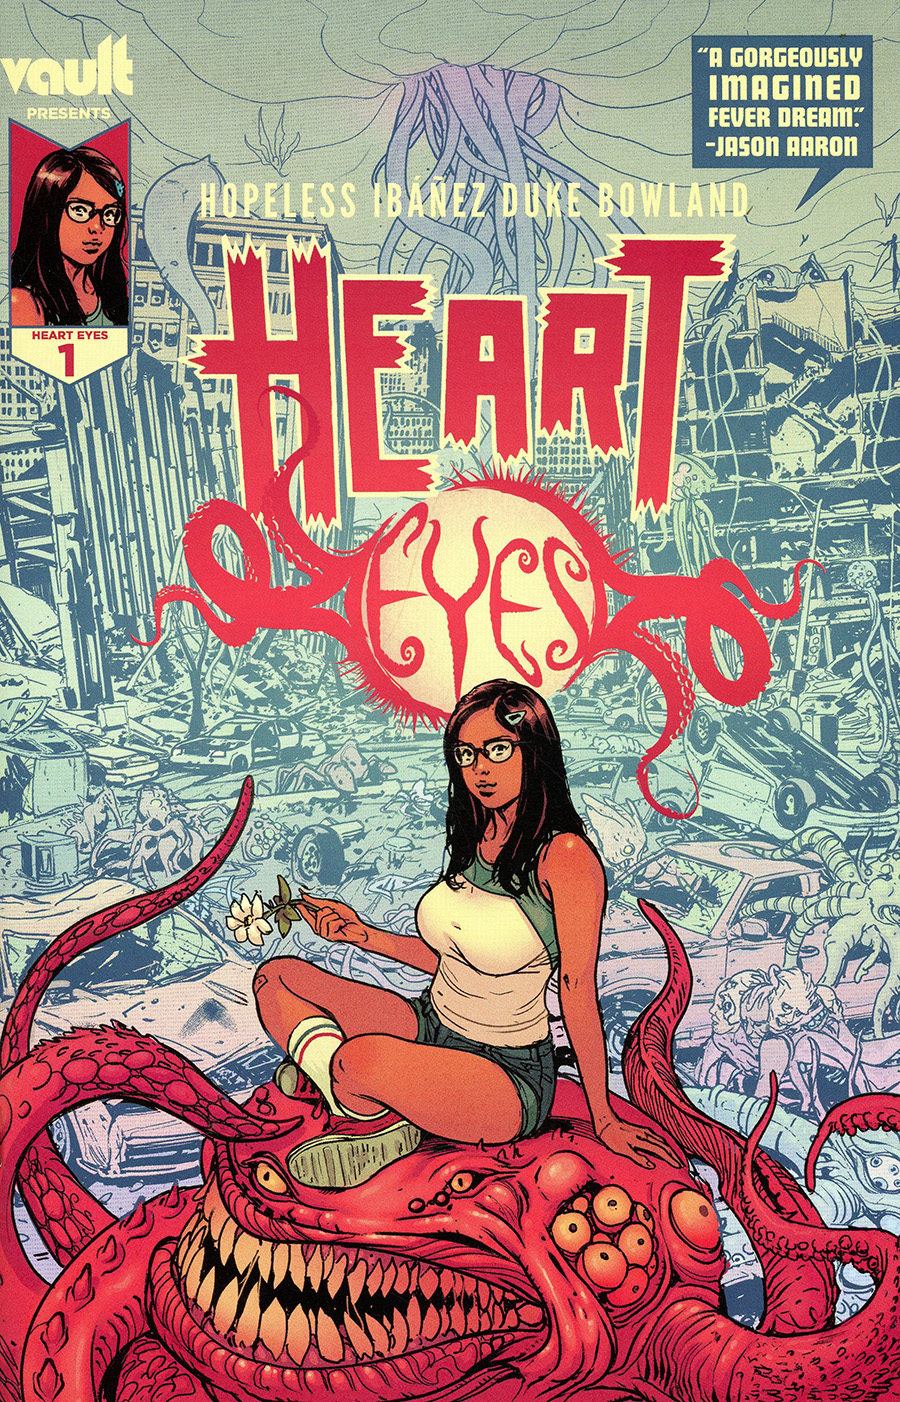 Heart Eyes #1 Cover A Regular Victor Ibanez Cover